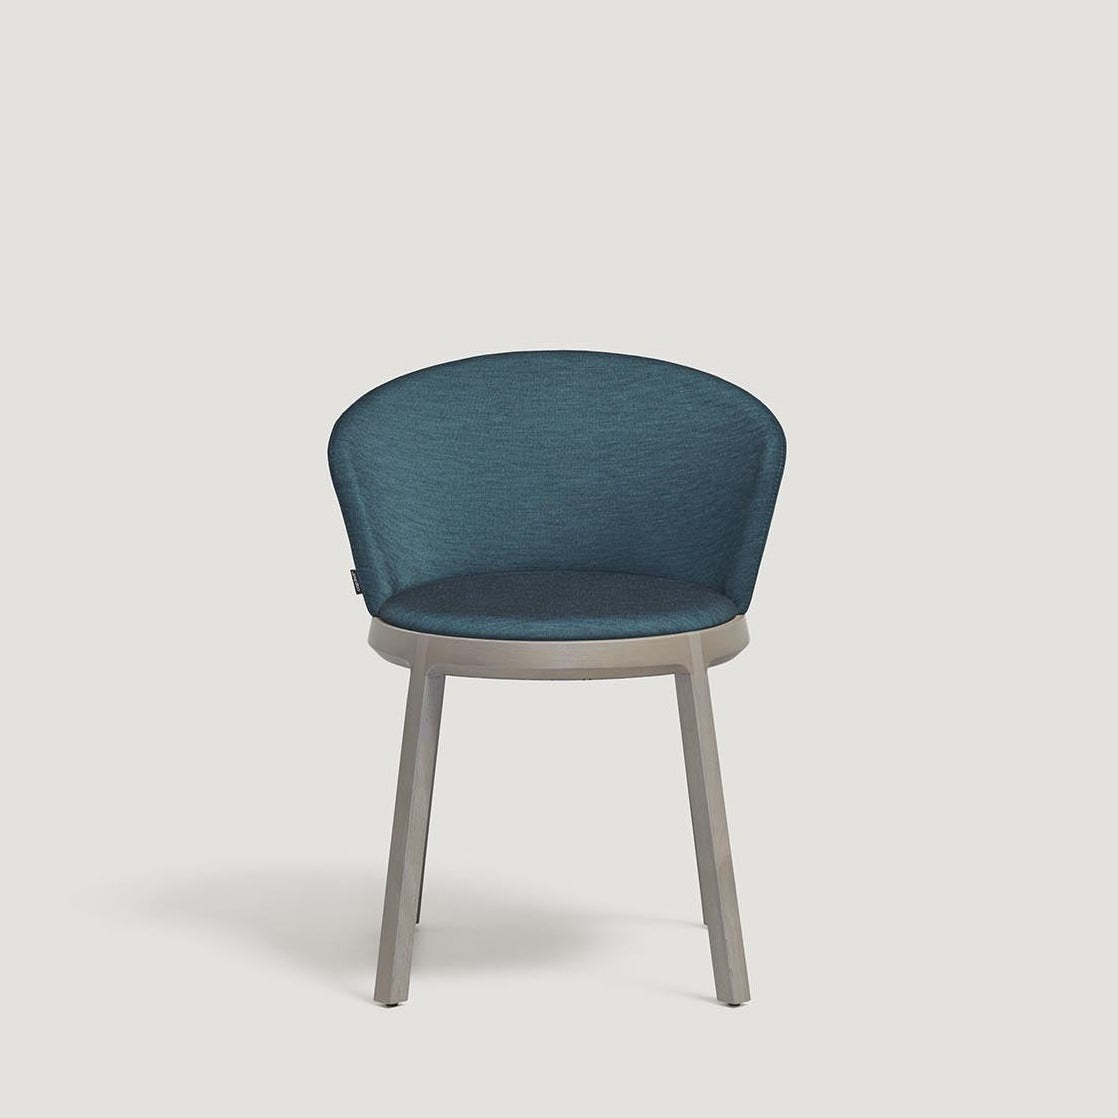 SILLA ARO Chair front view, grey base